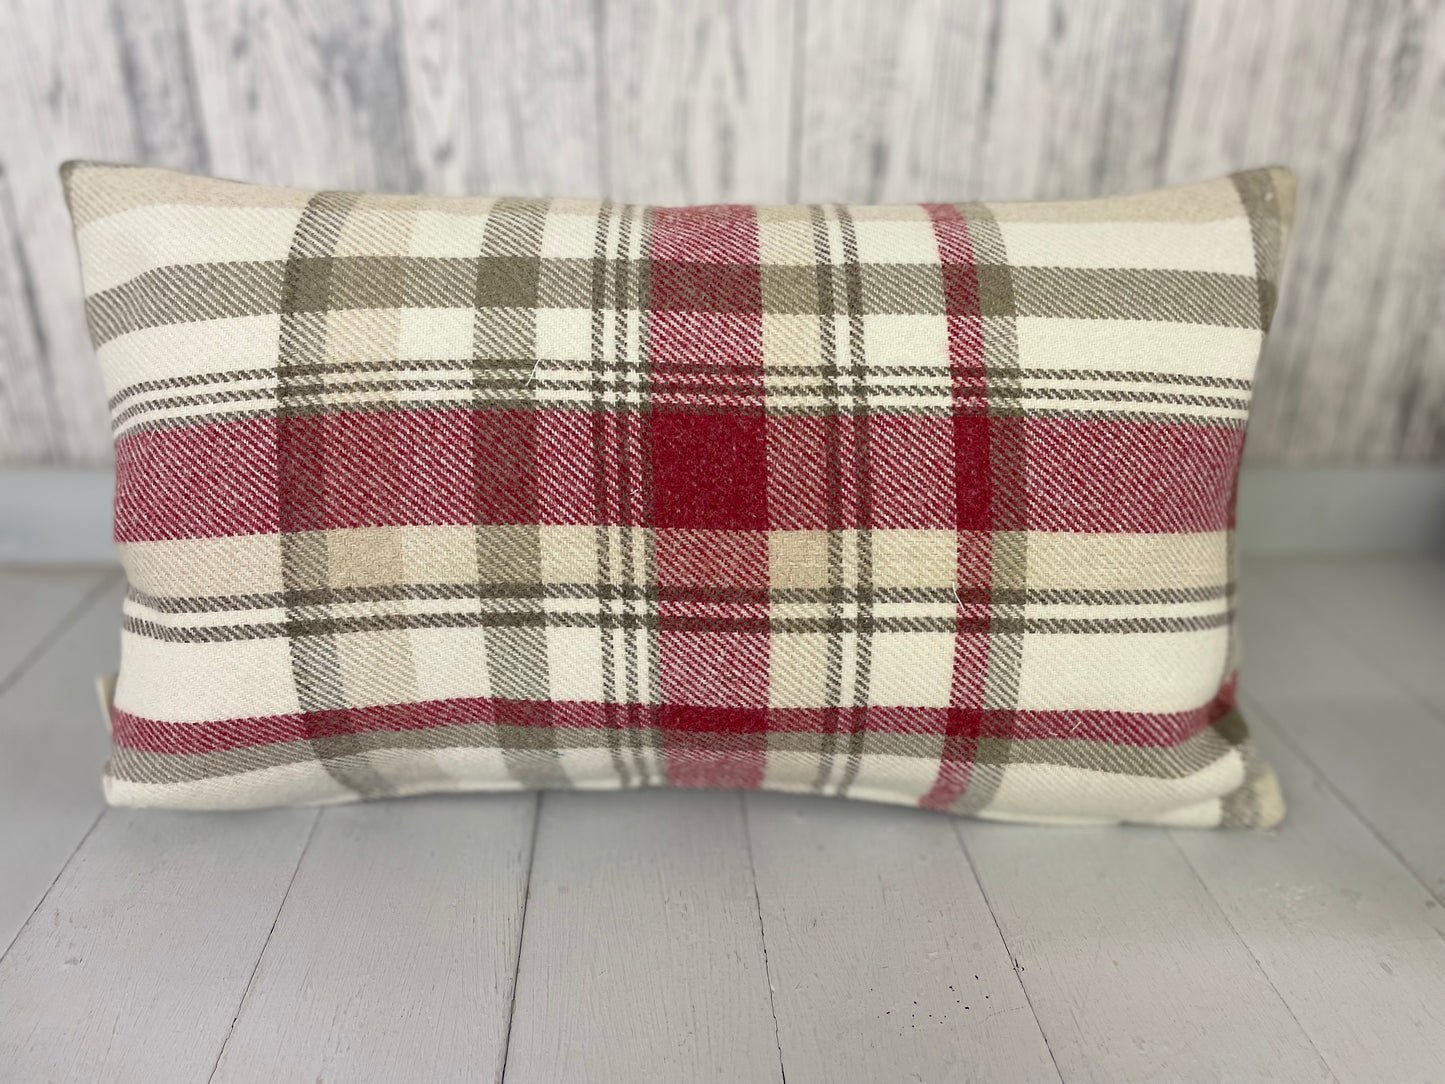 Welsh Quote Wool touch fabric cushion -Ffrind